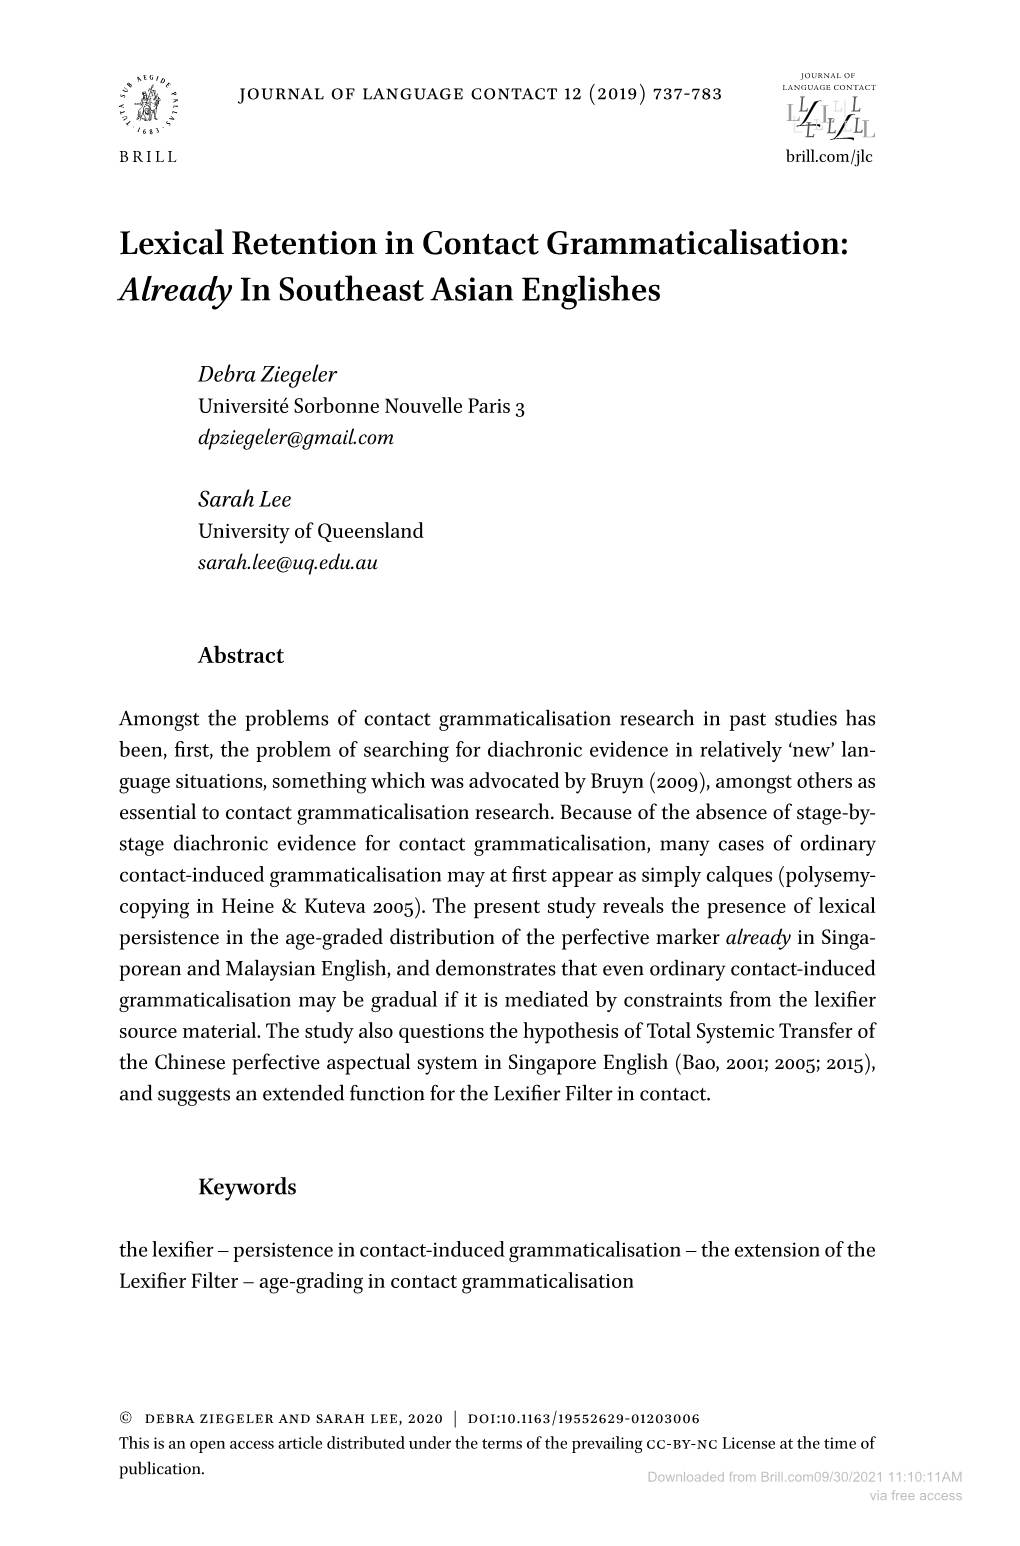 Lexical Retention in Contact Grammaticalisation: Already in Southeast Asian Englishes